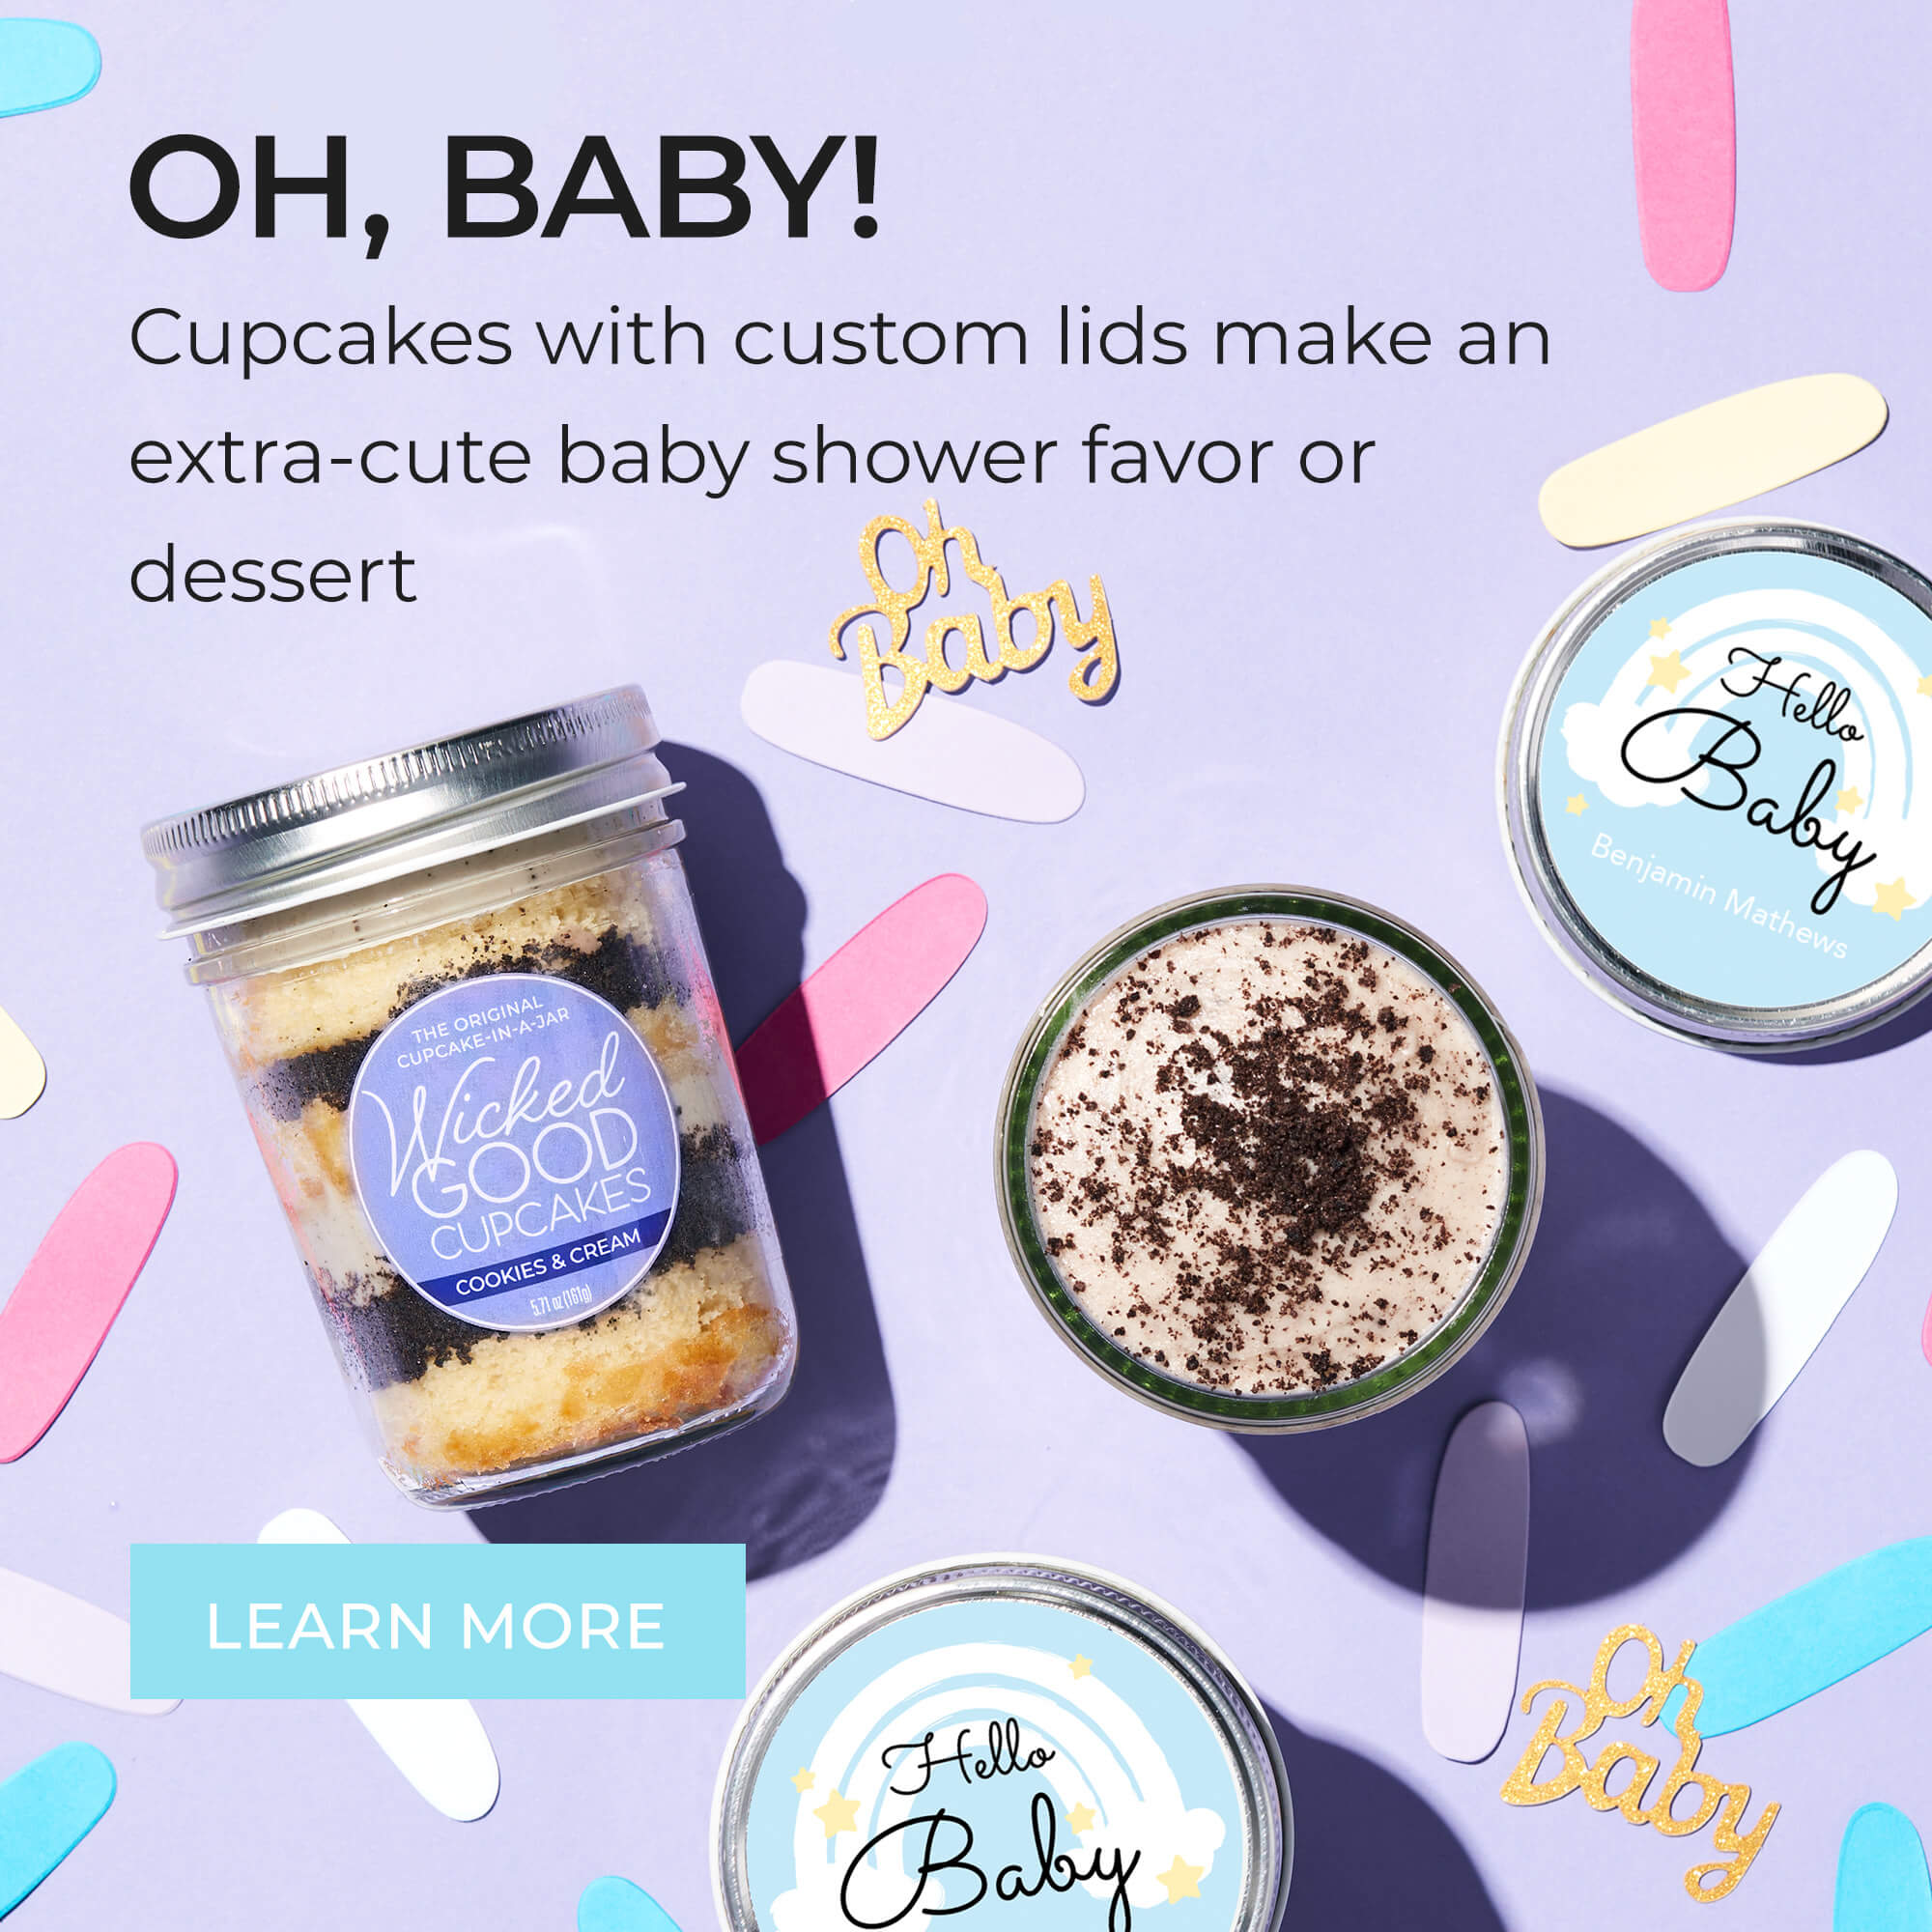 Oh, baby! Cupcakes with custom lids make an extra-cute baby shower favor or dessert.